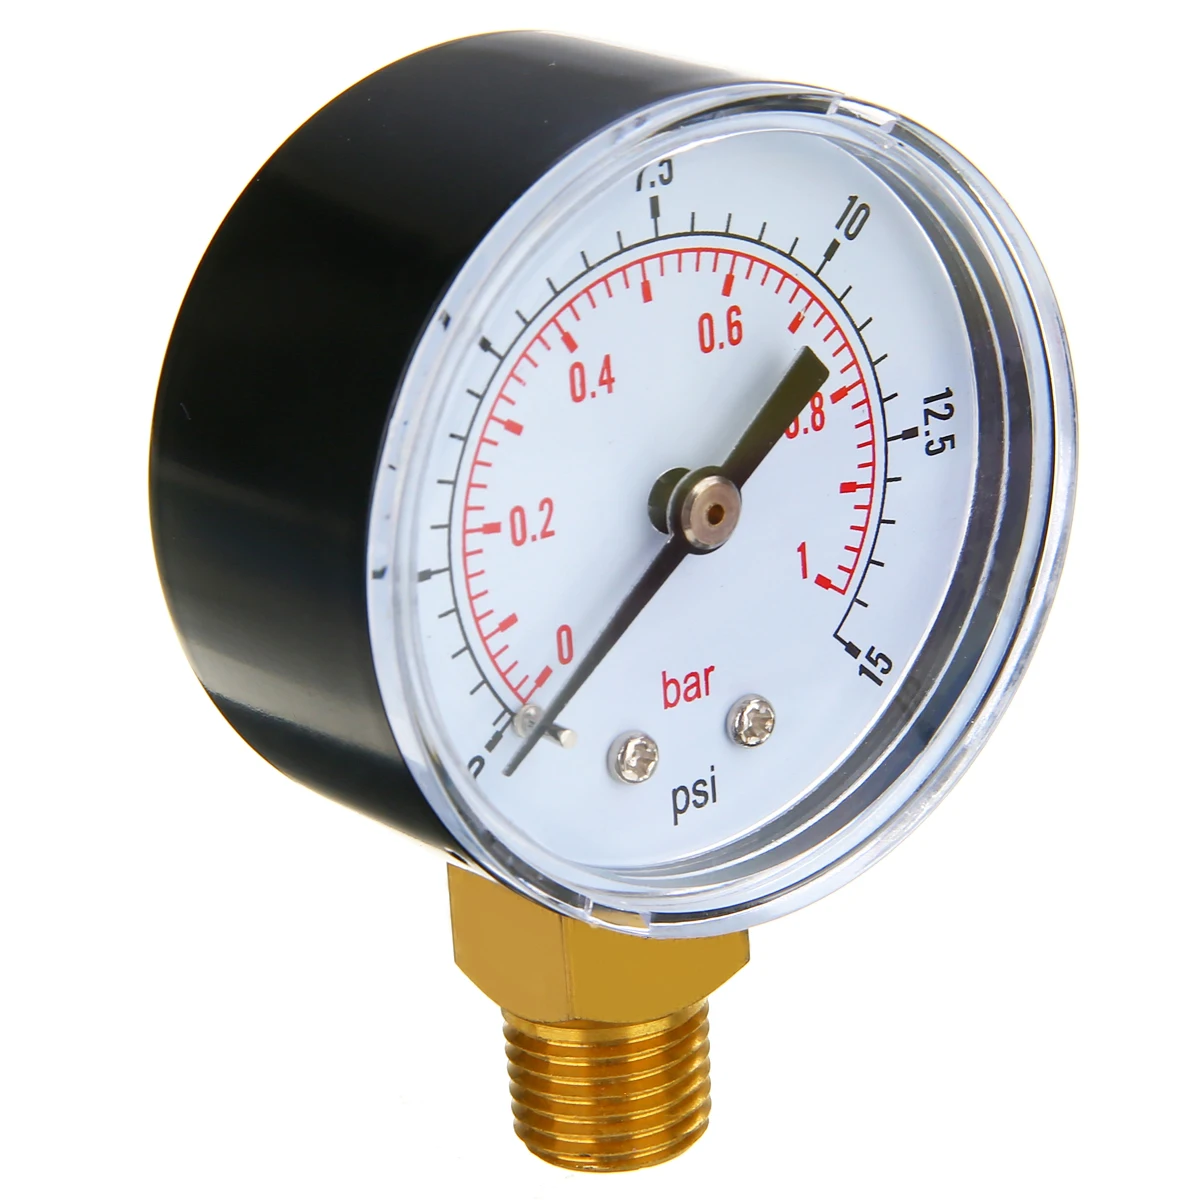 Mini Pressure Gauge For Fuel Air Oil Or Water 0-200/0-30/0-60/0-15 EY 0i 